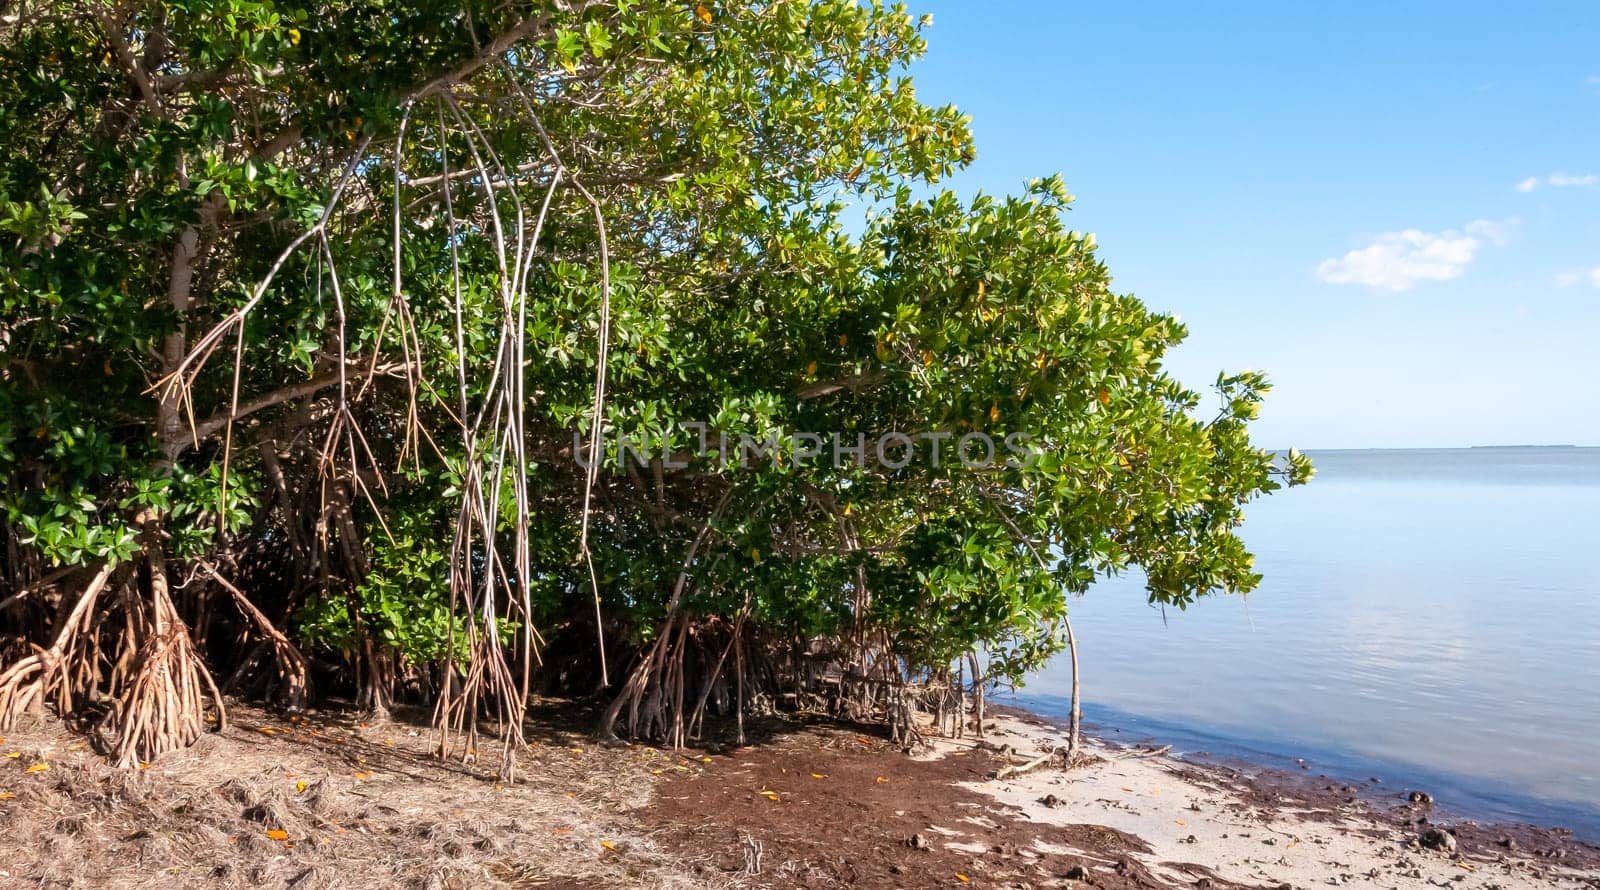 Mangroves on the coast of the Gulf of Mexico in Florida